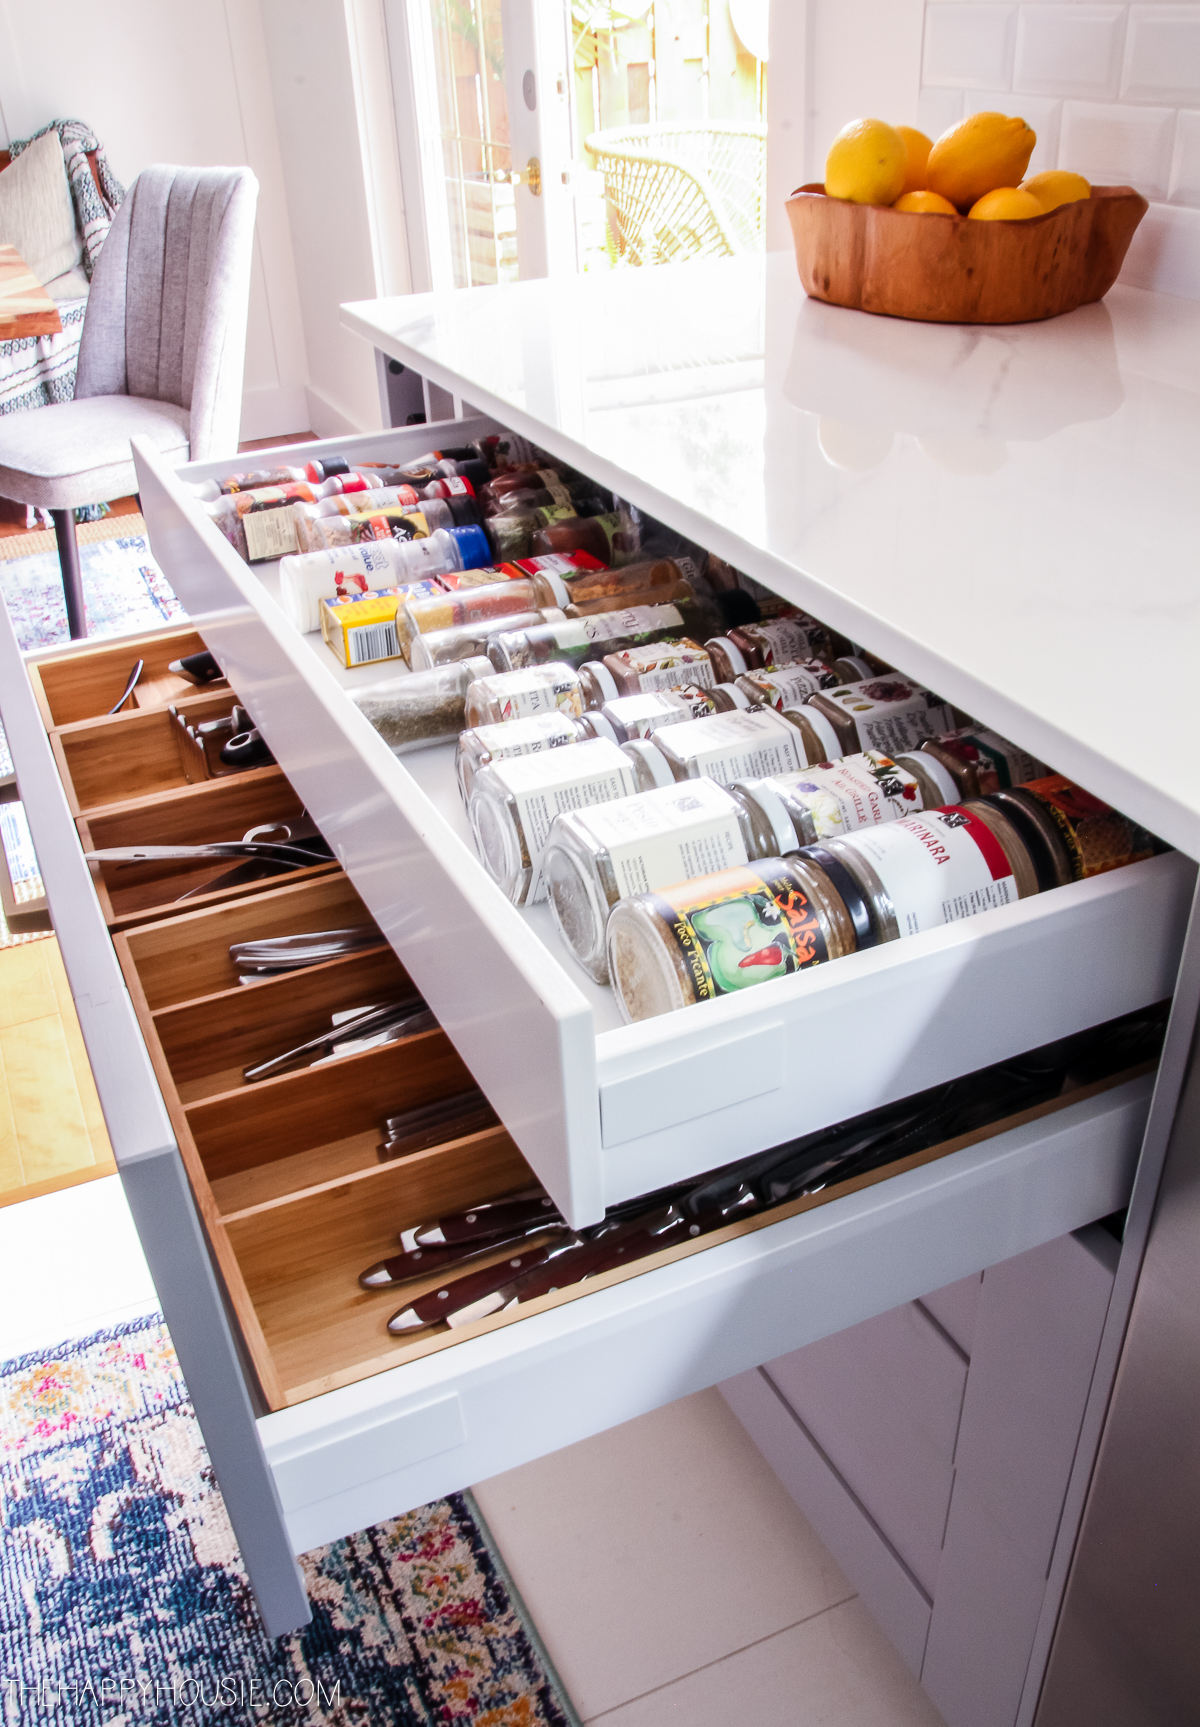 Opened kitchen drawers with spices and cutlery.